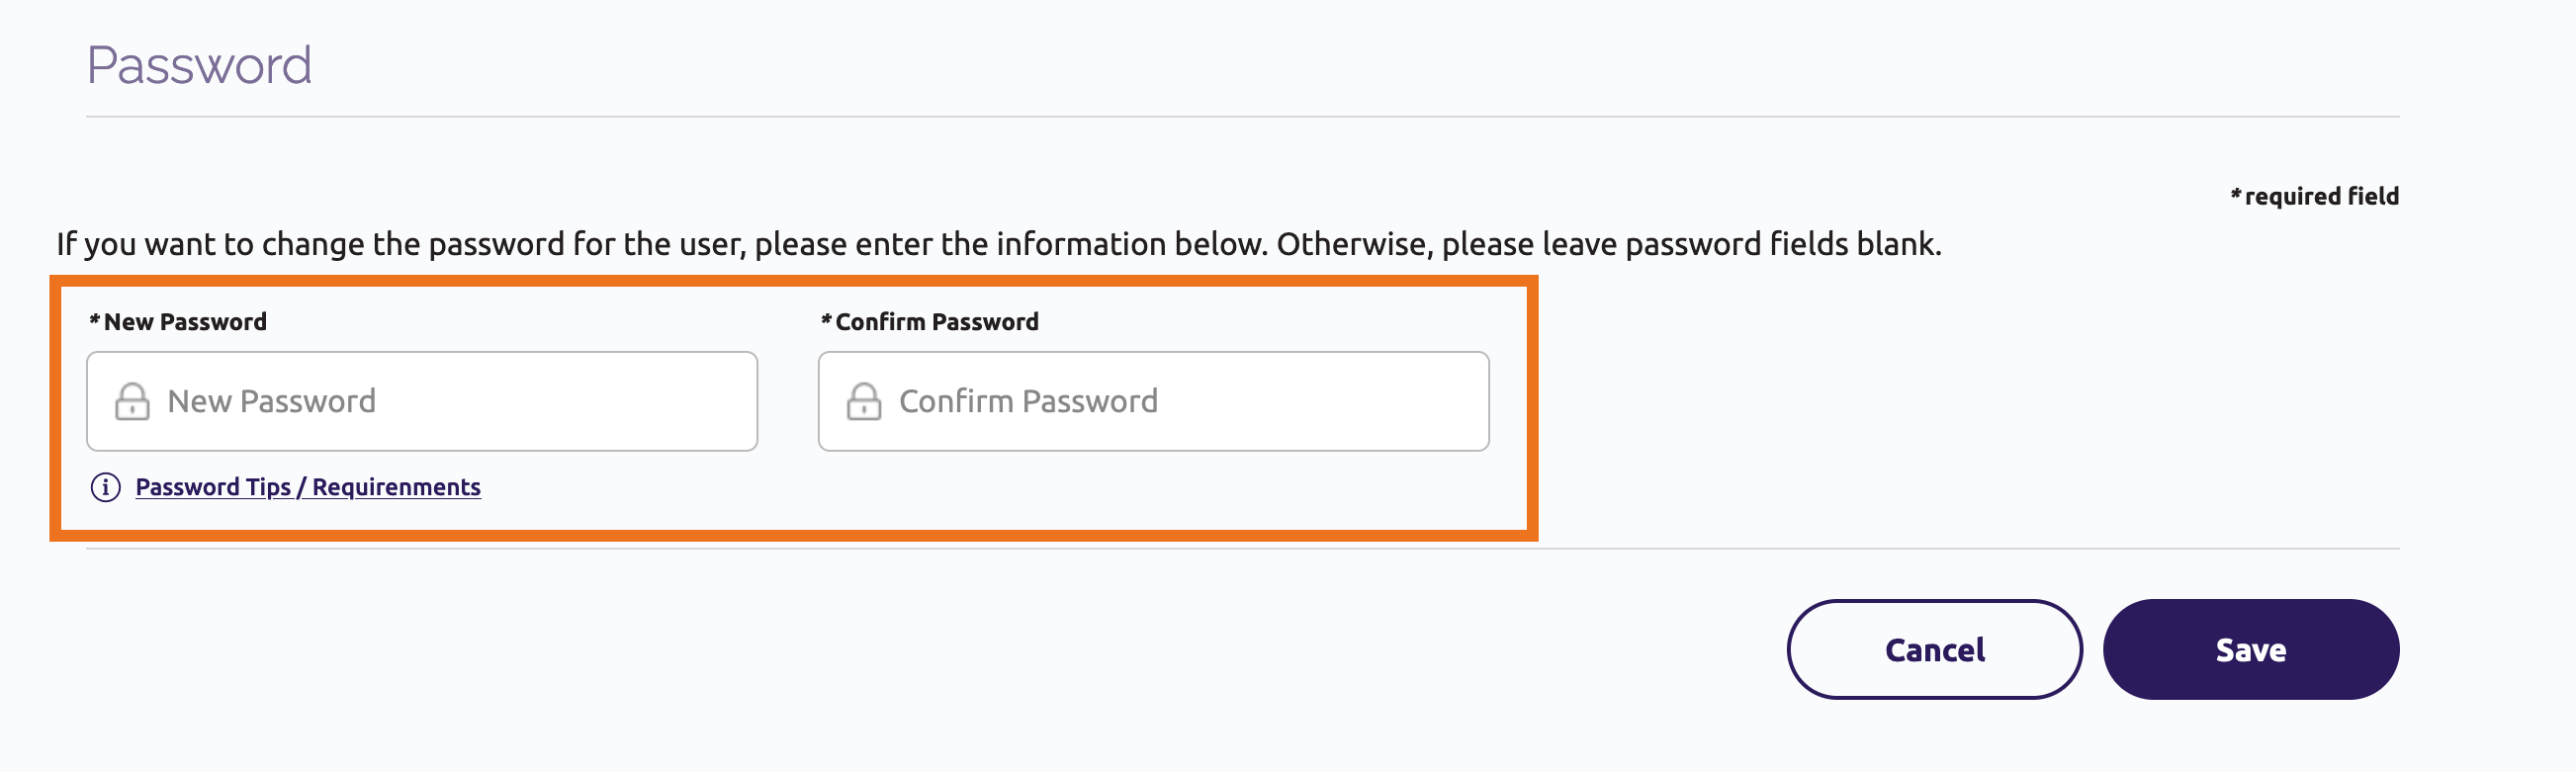 Form fields to enter new password and confirm new password